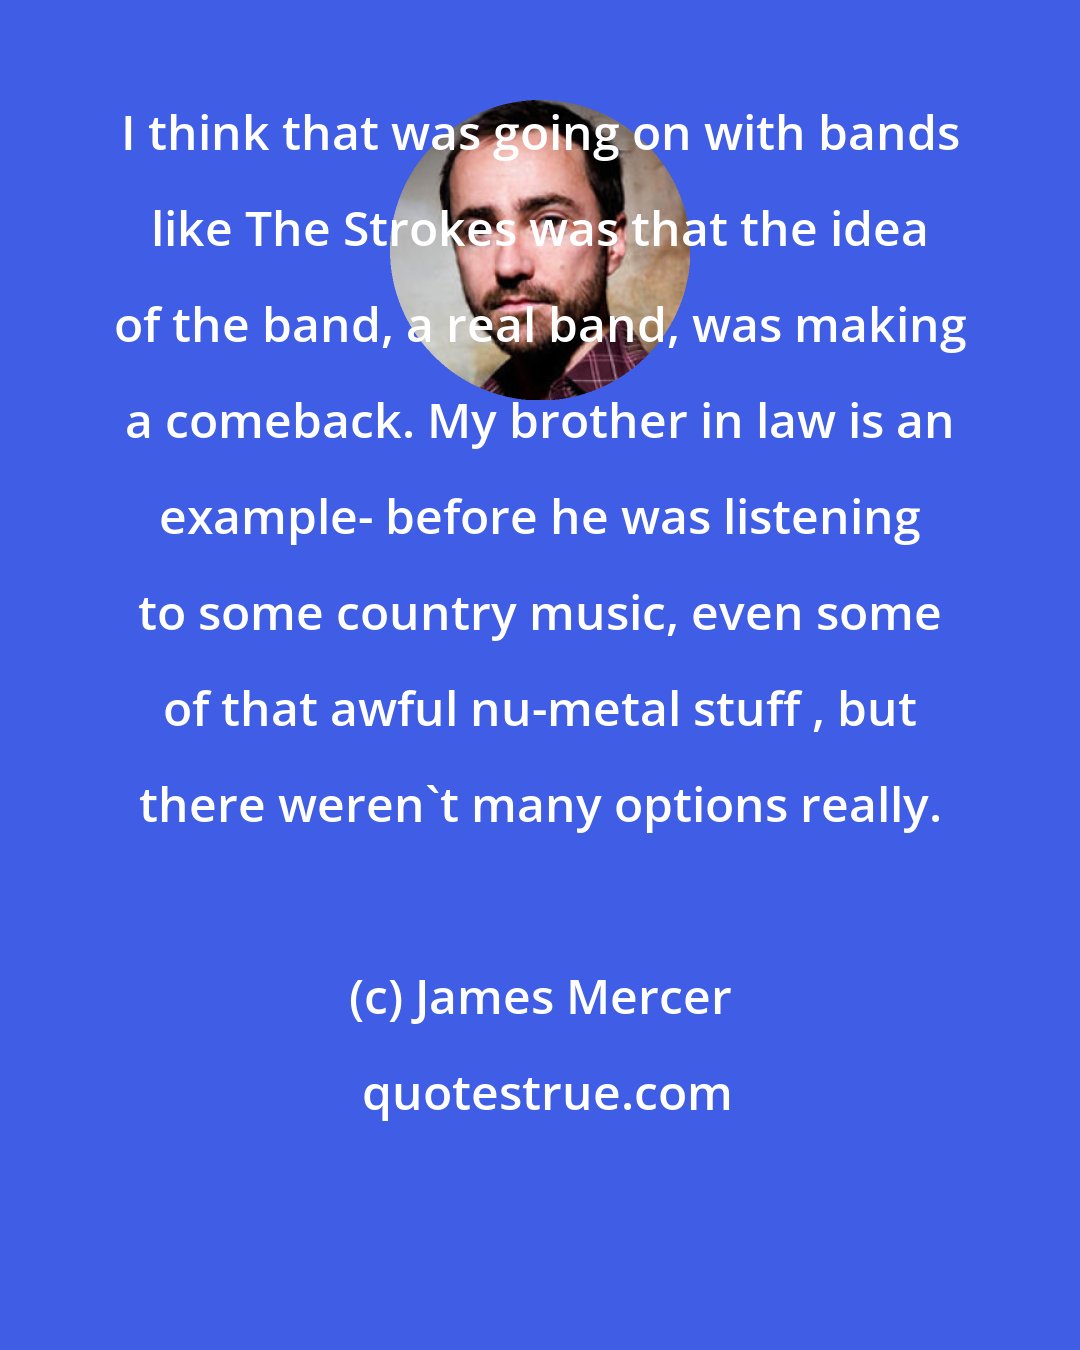 James Mercer: I think that was going on with bands like The Strokes was that the idea of the band, a real band, was making a comeback. My brother in law is an example- before he was listening to some country music, even some of that awful nu-metal stuff , but there weren't many options really.